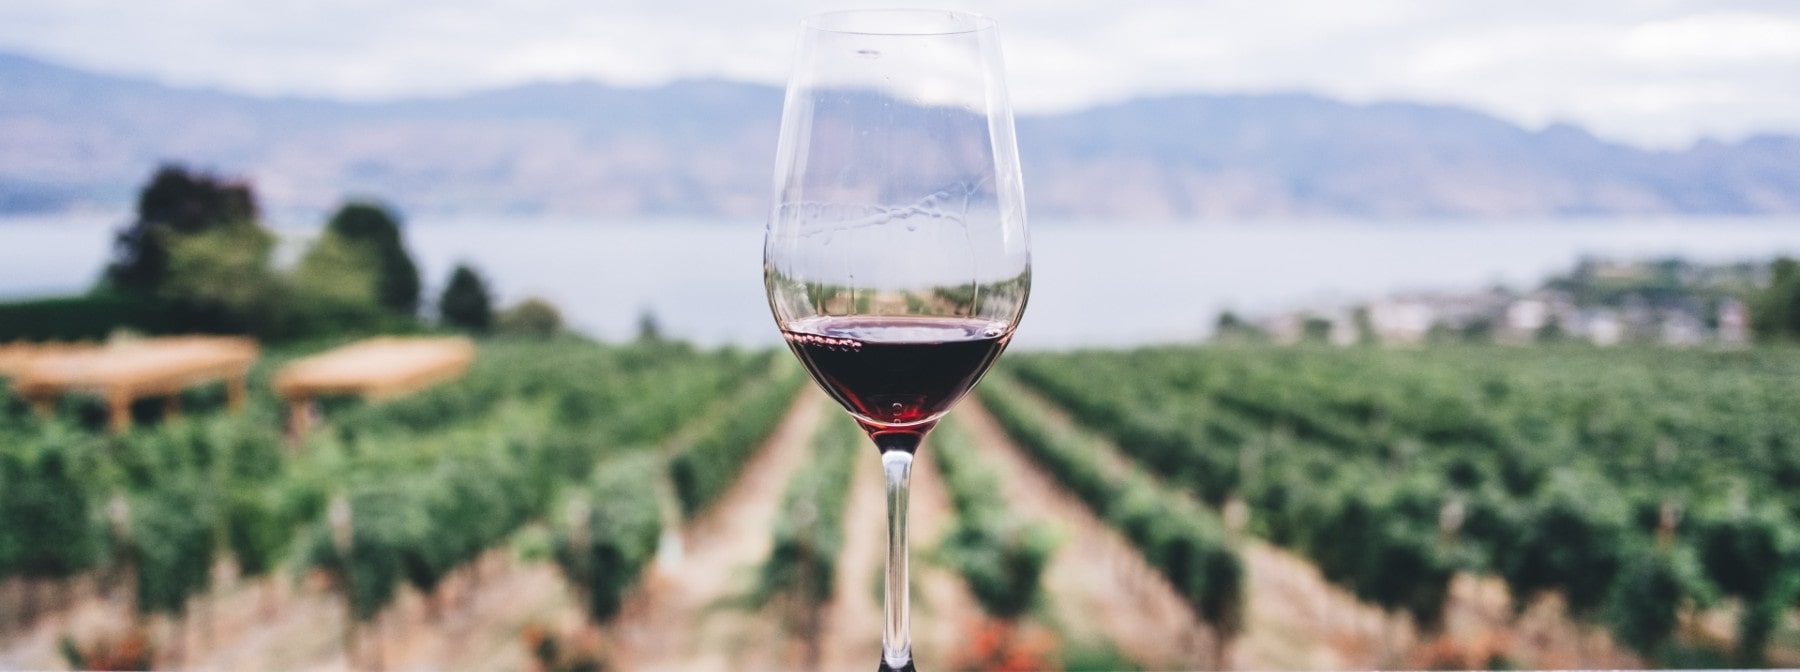 What Is Trans Resveratrol? | Benefits, Side Effects, Dosage